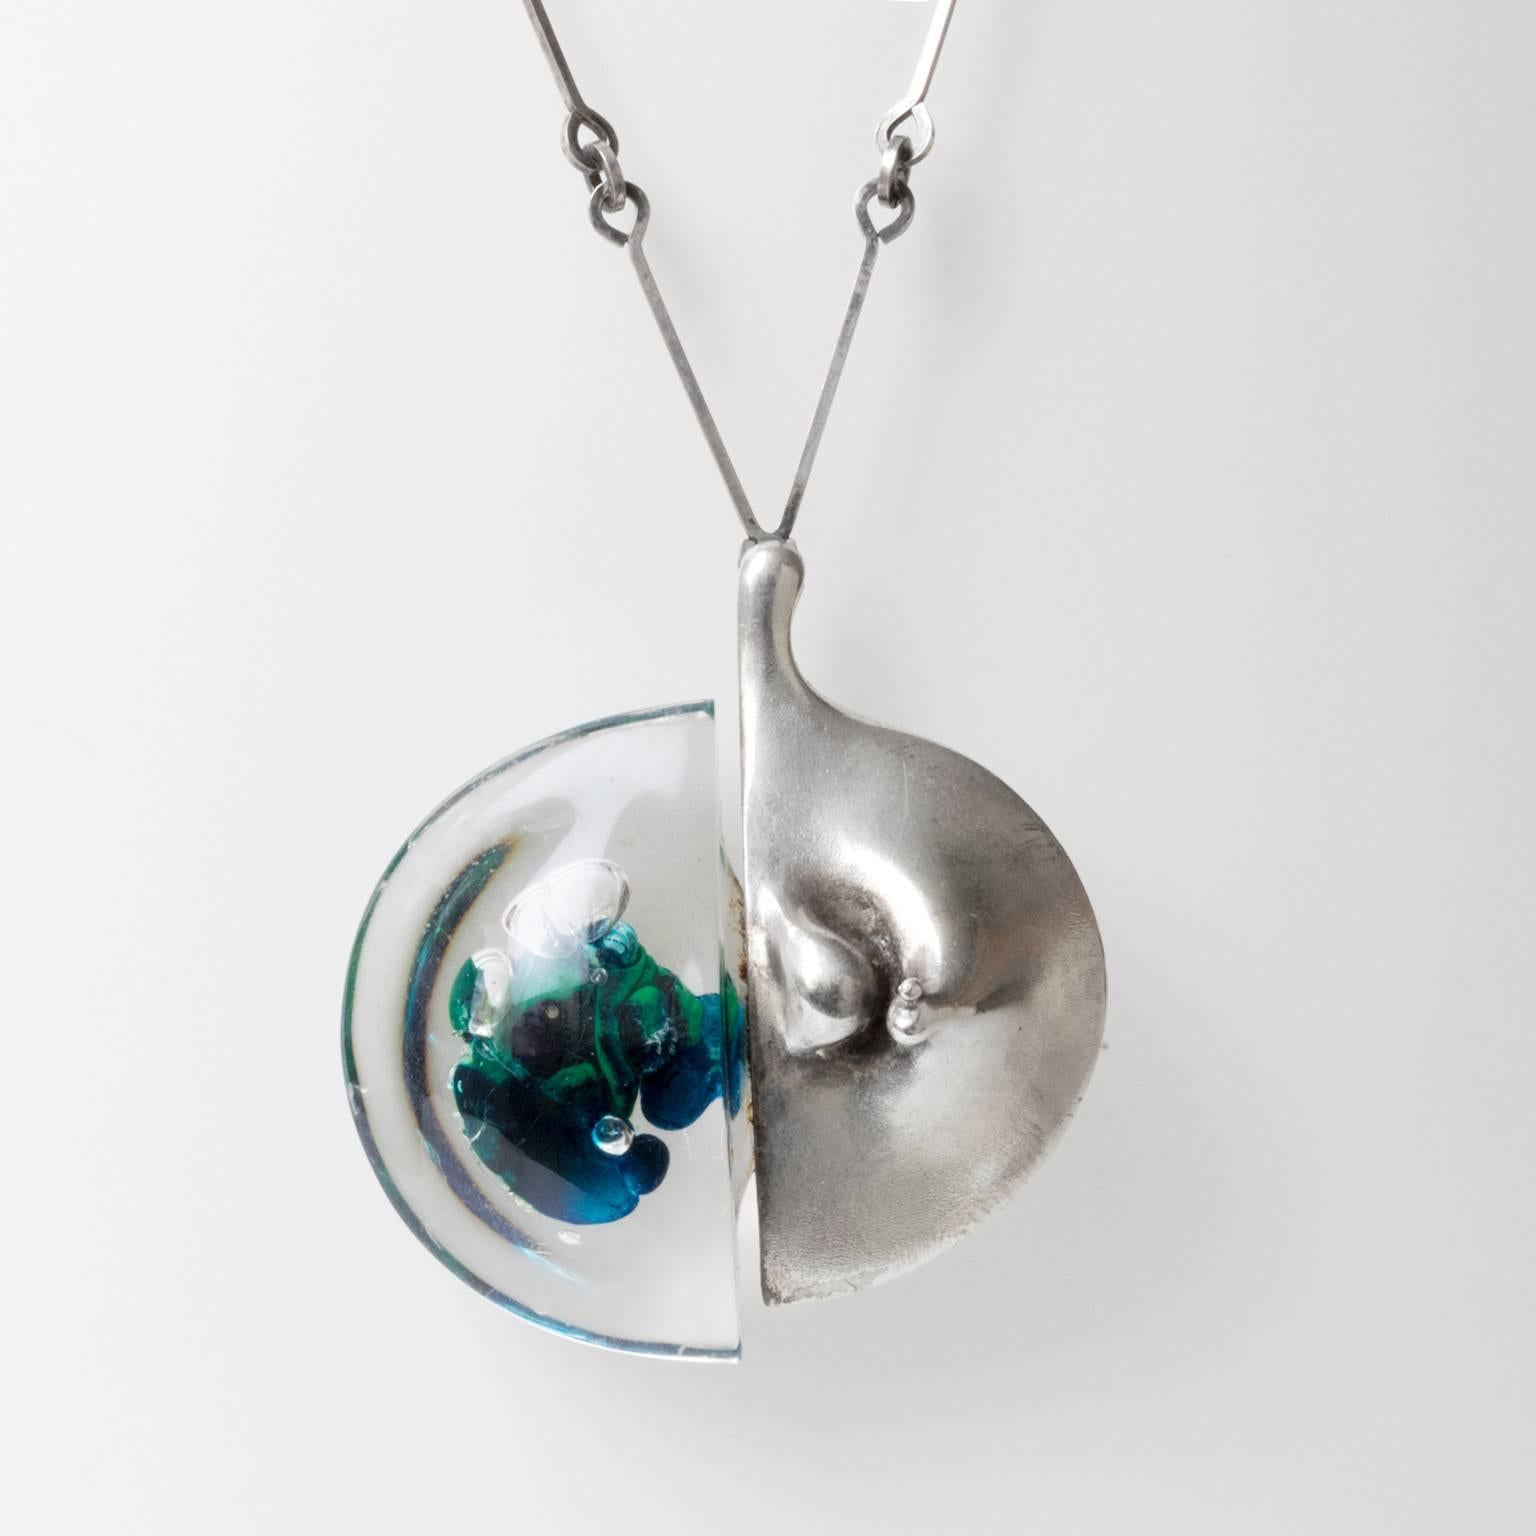 Bjorn Weckstrom "Kilimanjaro" necklace and pendant in silver and acrylic. Made at Lapponia, Finland, 1970's.